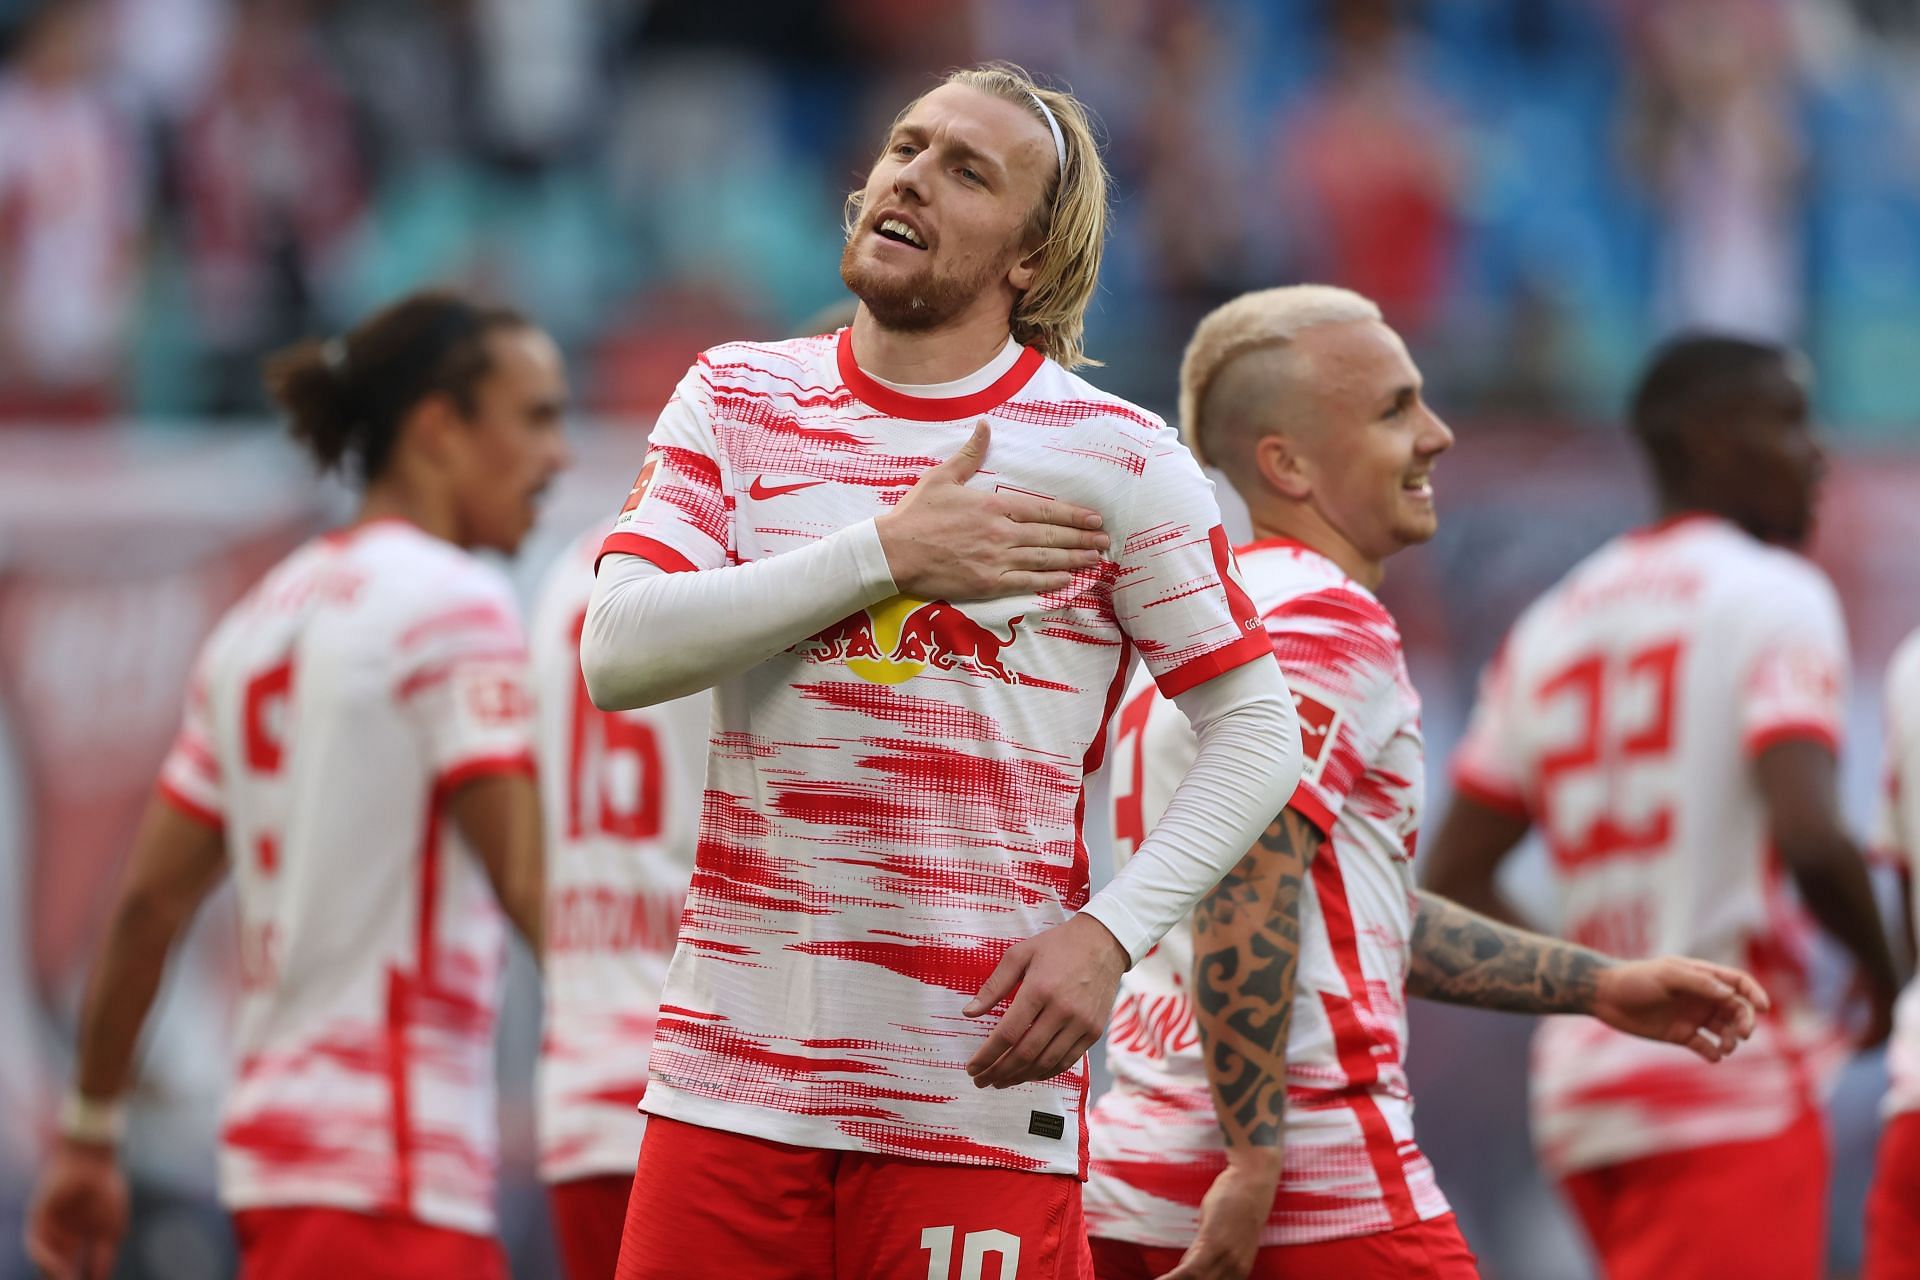 Emil Forsberg has been the creative force for RB Leipzig